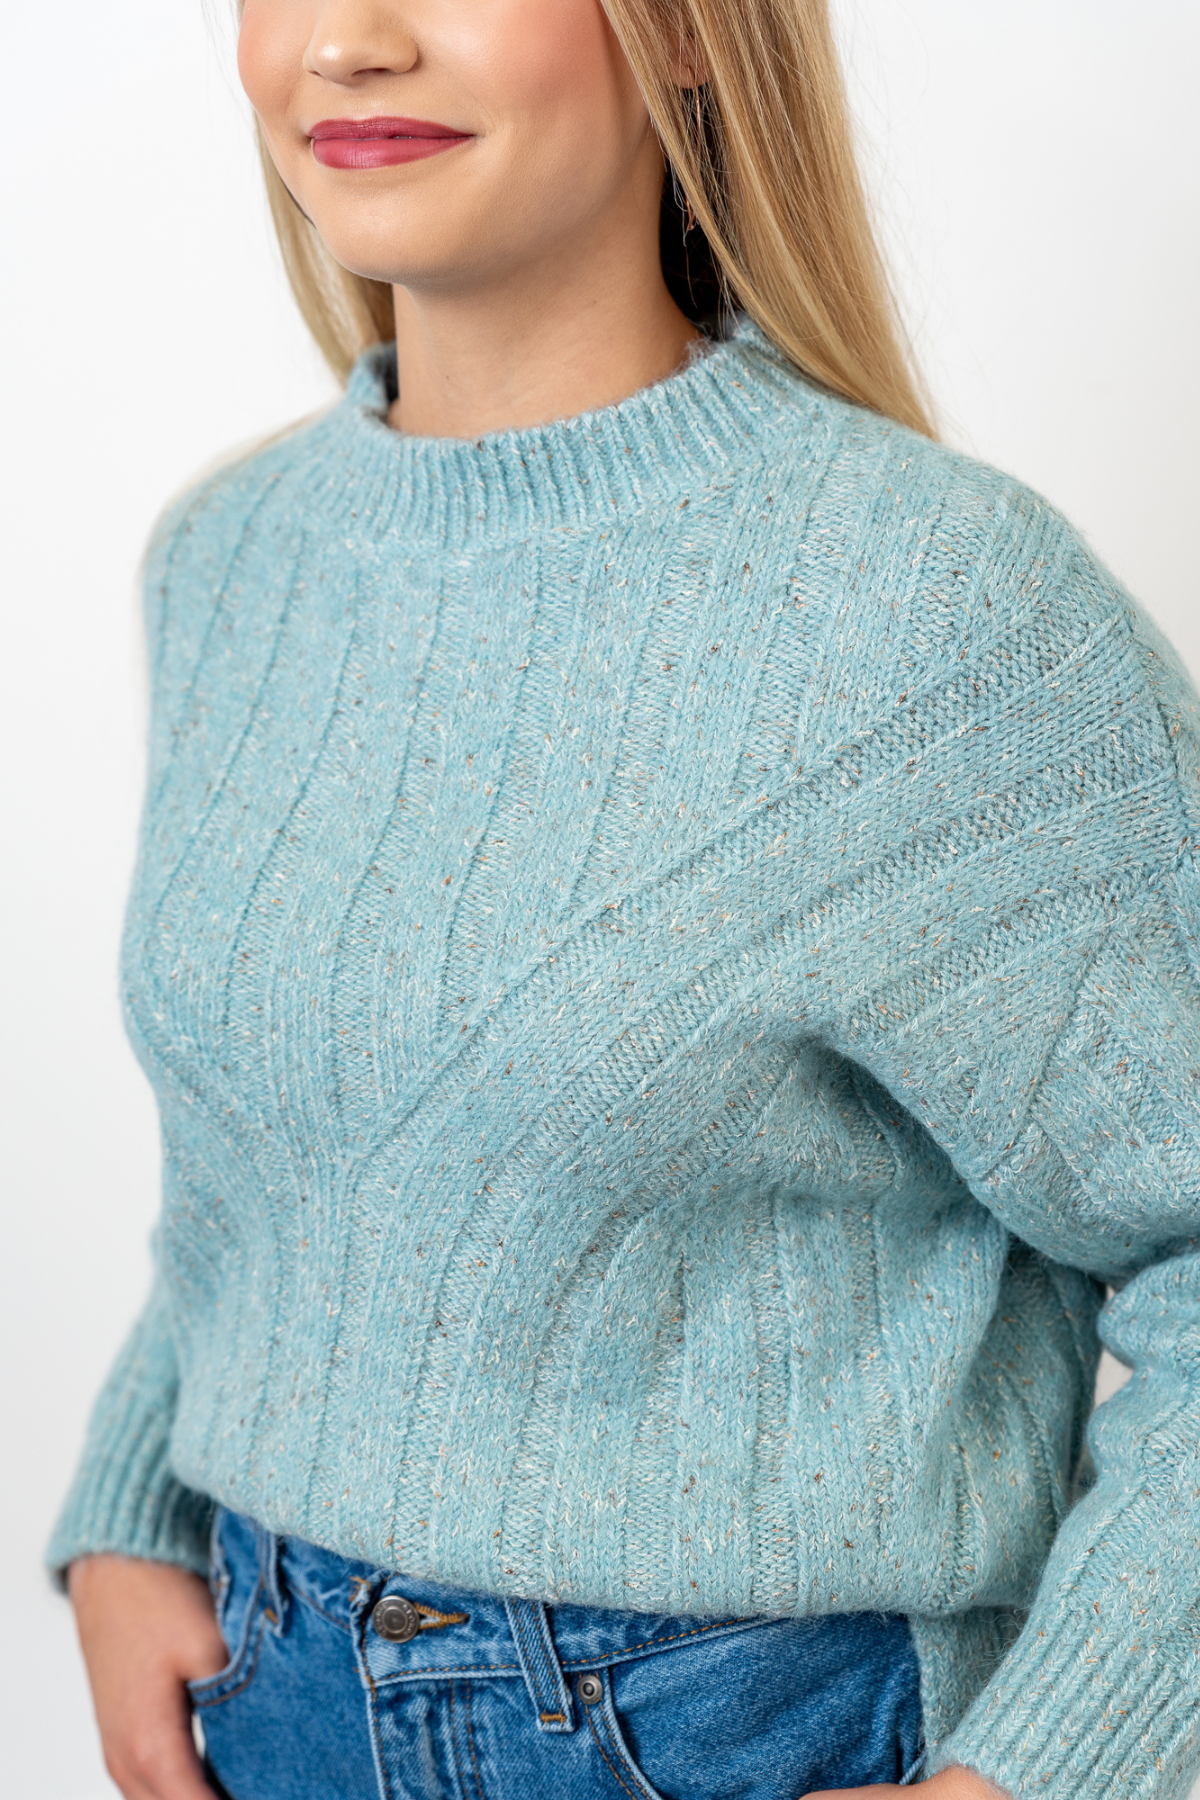 The Maeve Sweater